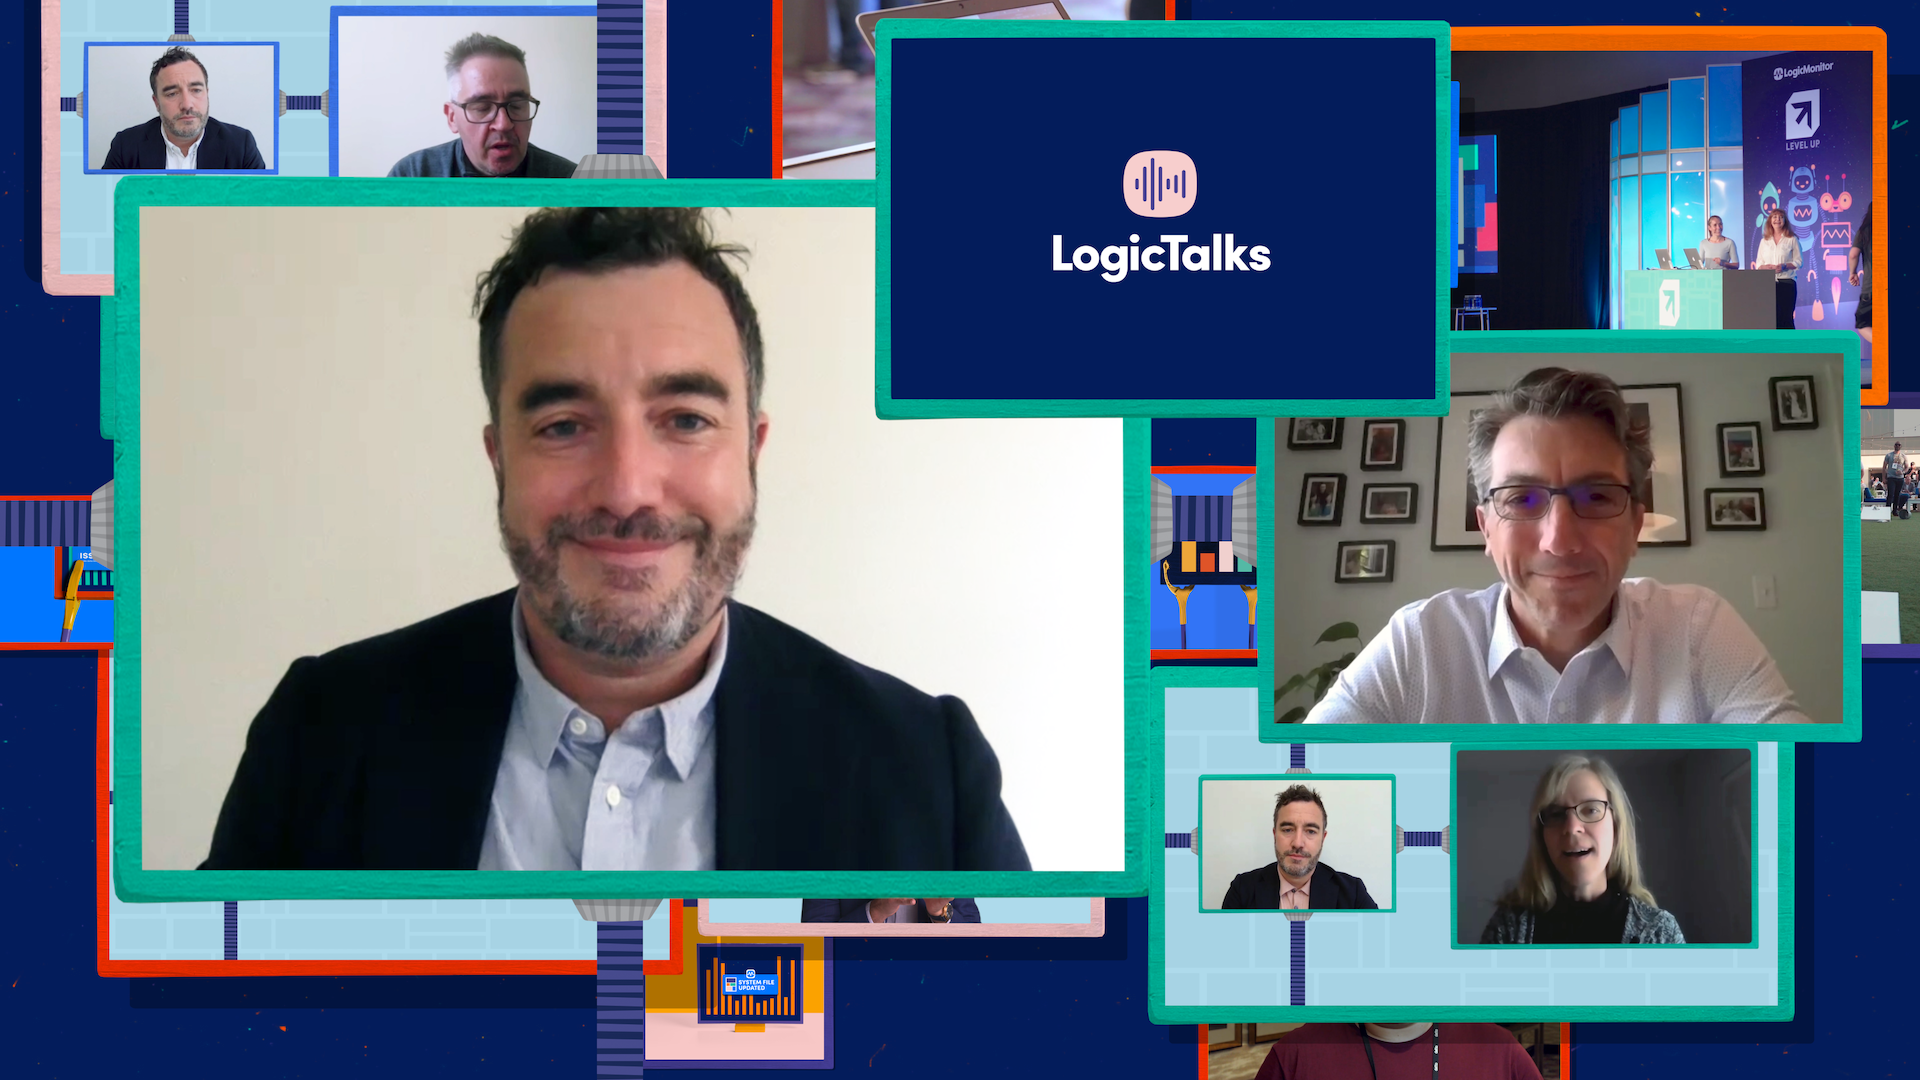 LogicTalks: Logicalis, with Mark Banfield, Chief Revenue Officer at LogicMonitor and Justin Cawood of Logicalis